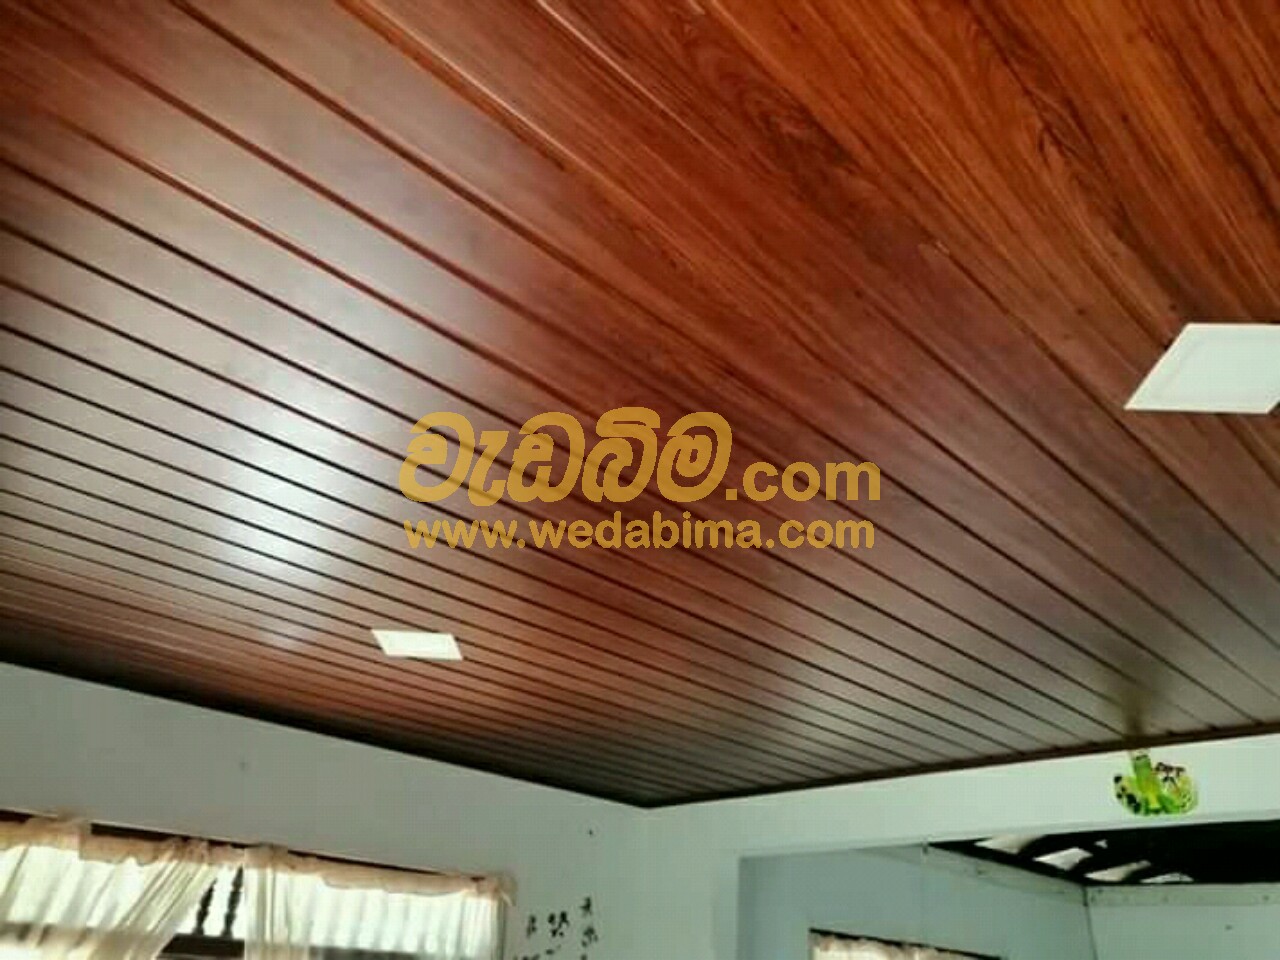 I-Panel Ceiling and Wall Panels in Sri Lanka